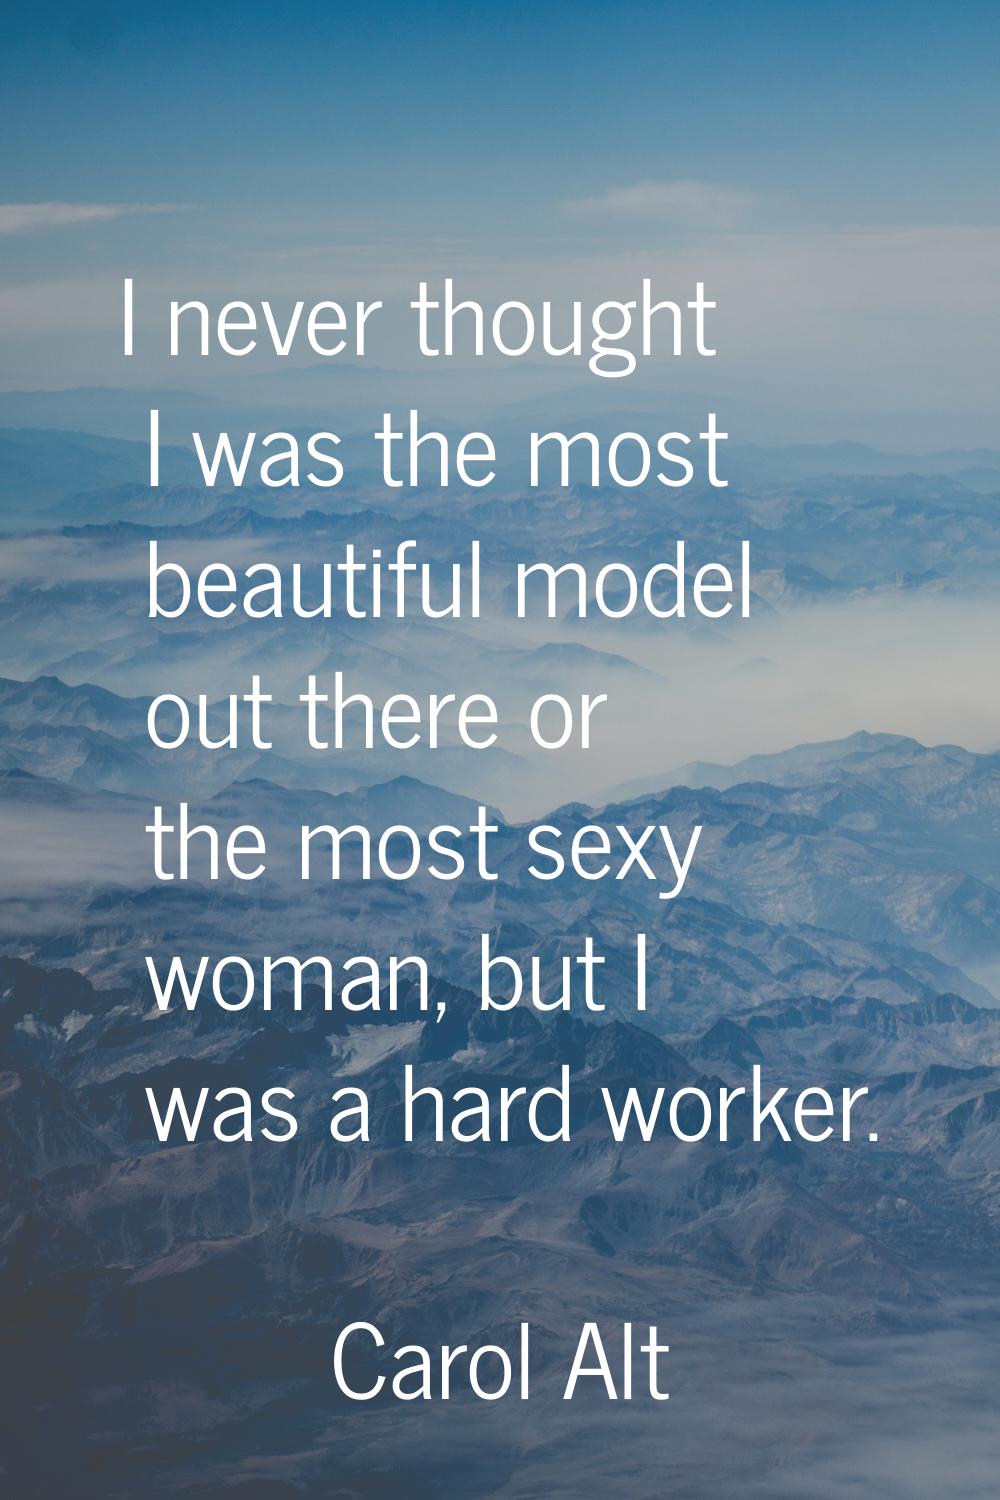 I never thought I was the most beautiful model out there or the most sexy woman, but I was a hard w